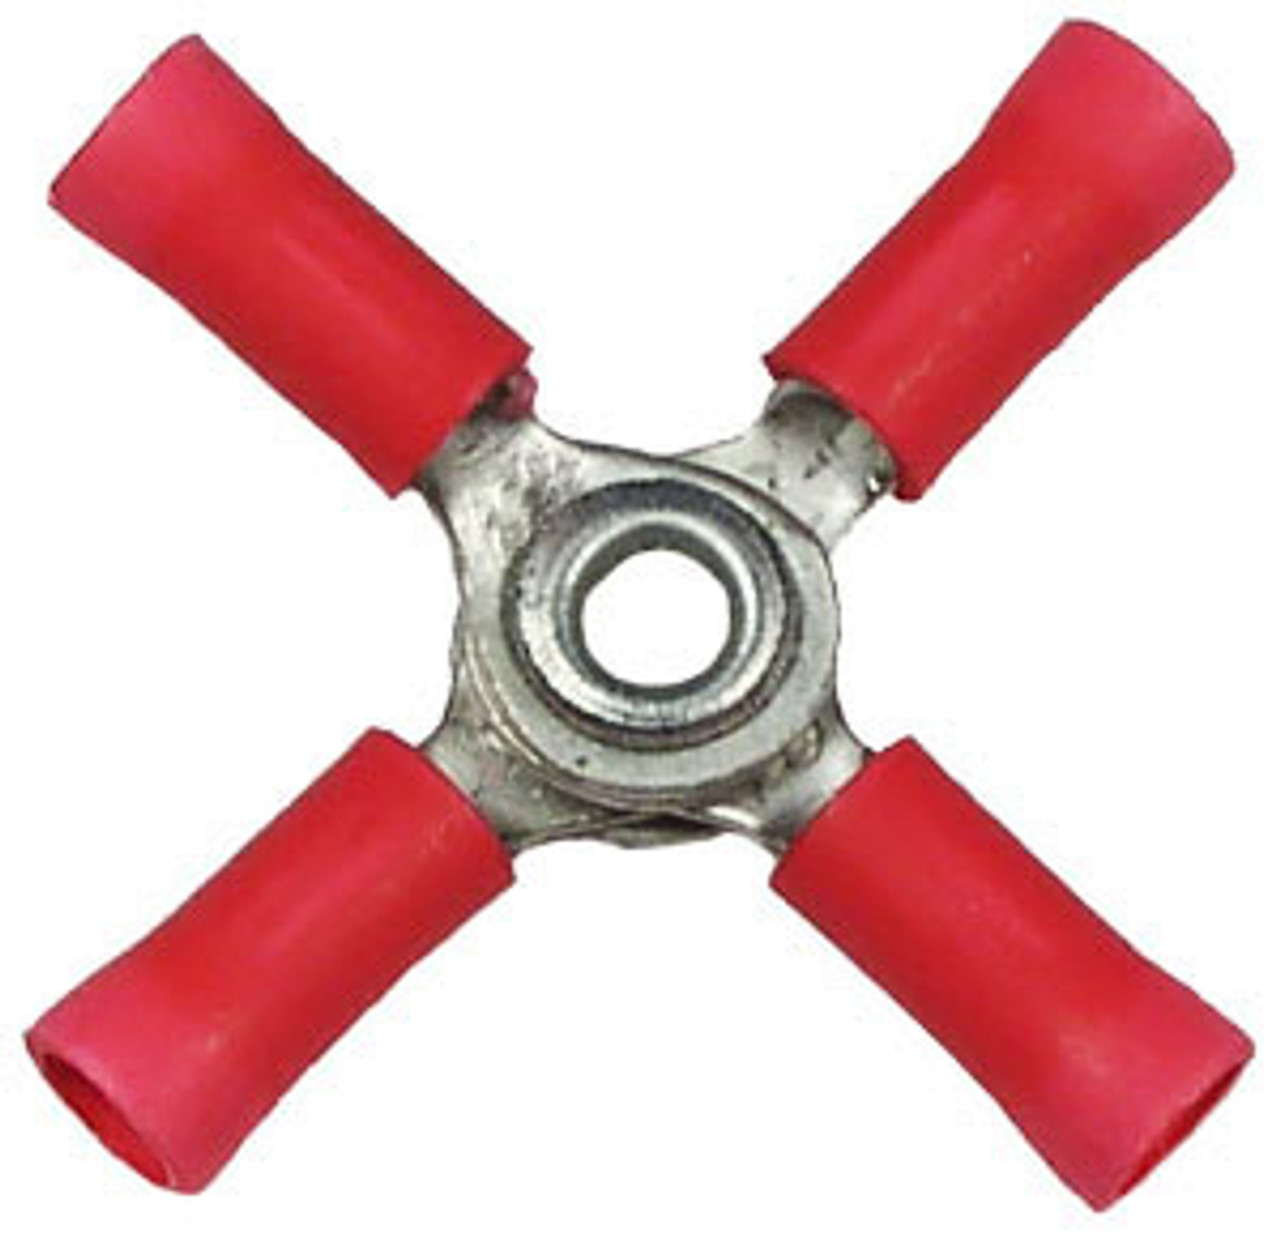 2 Pc. 22-18 AWG Vinyl Insulated 4-Way Connector  1721-13